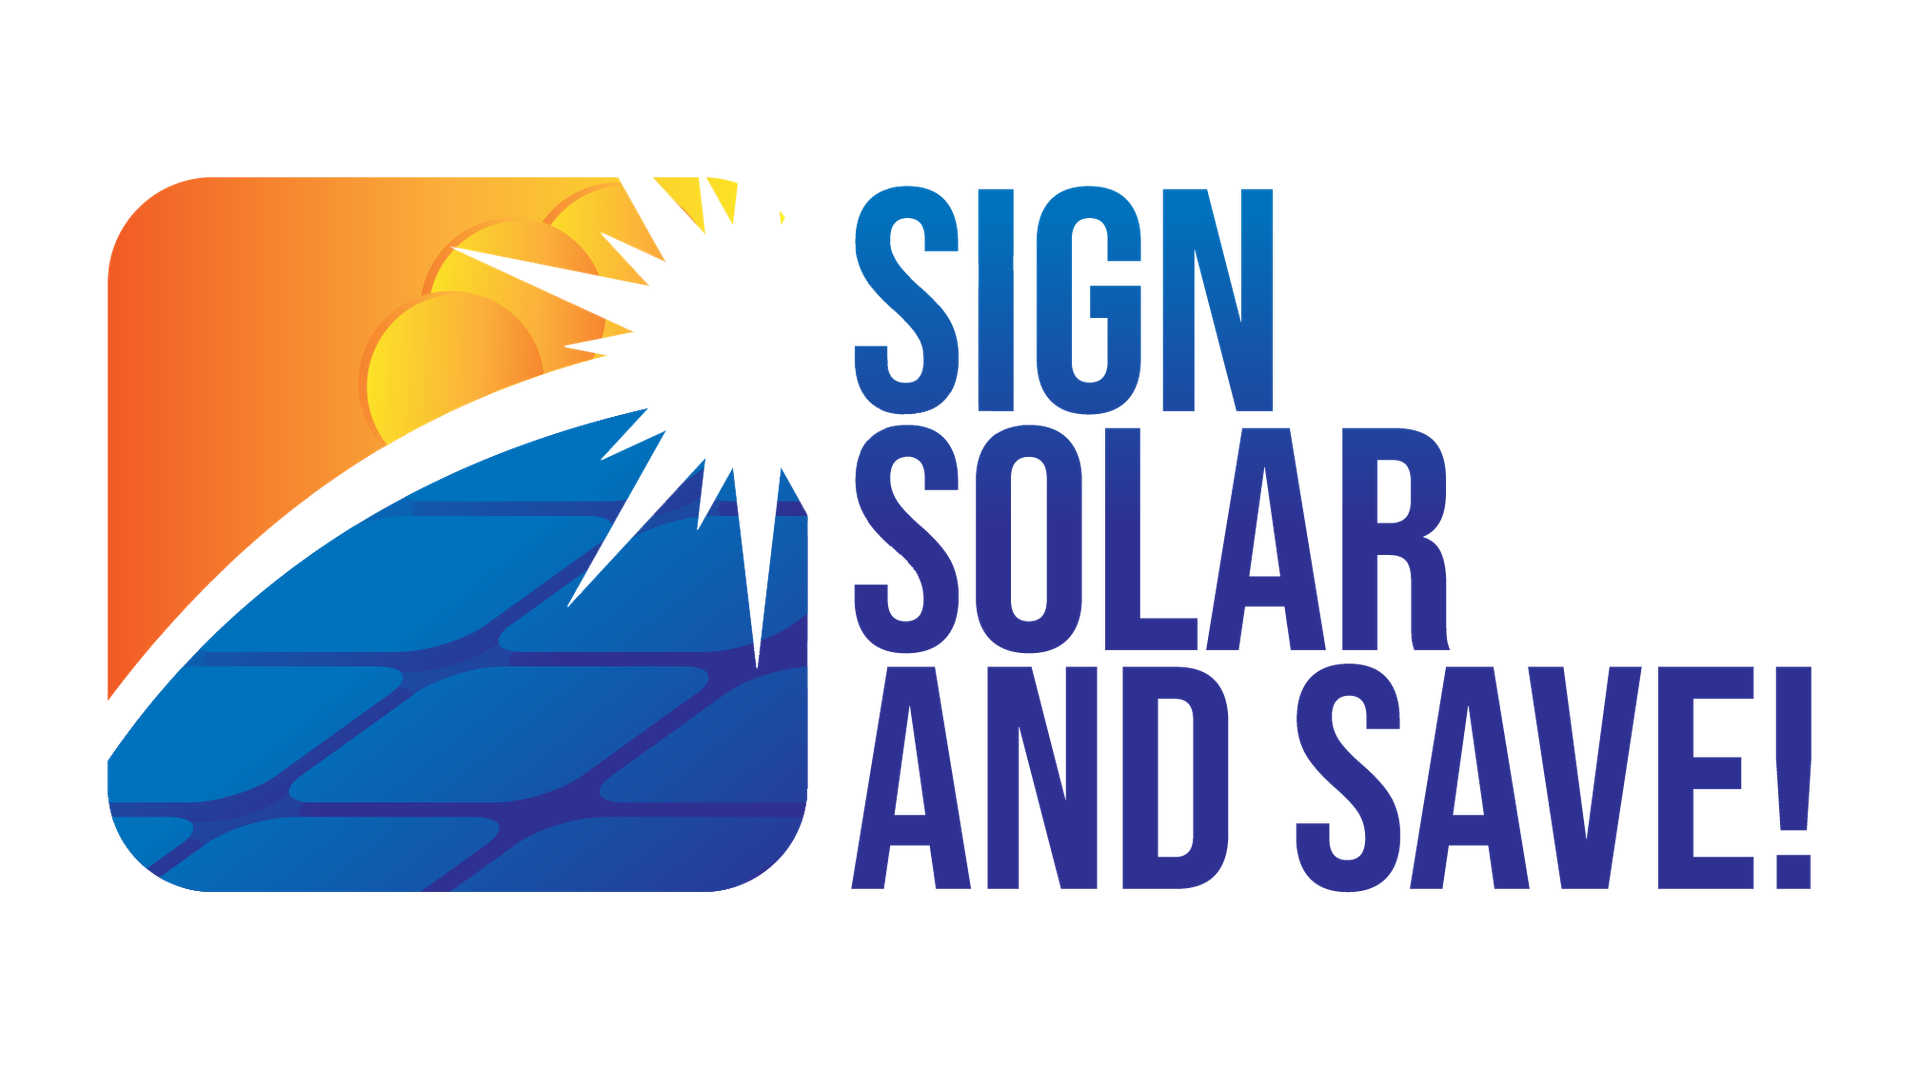 Sign, Solar and Save